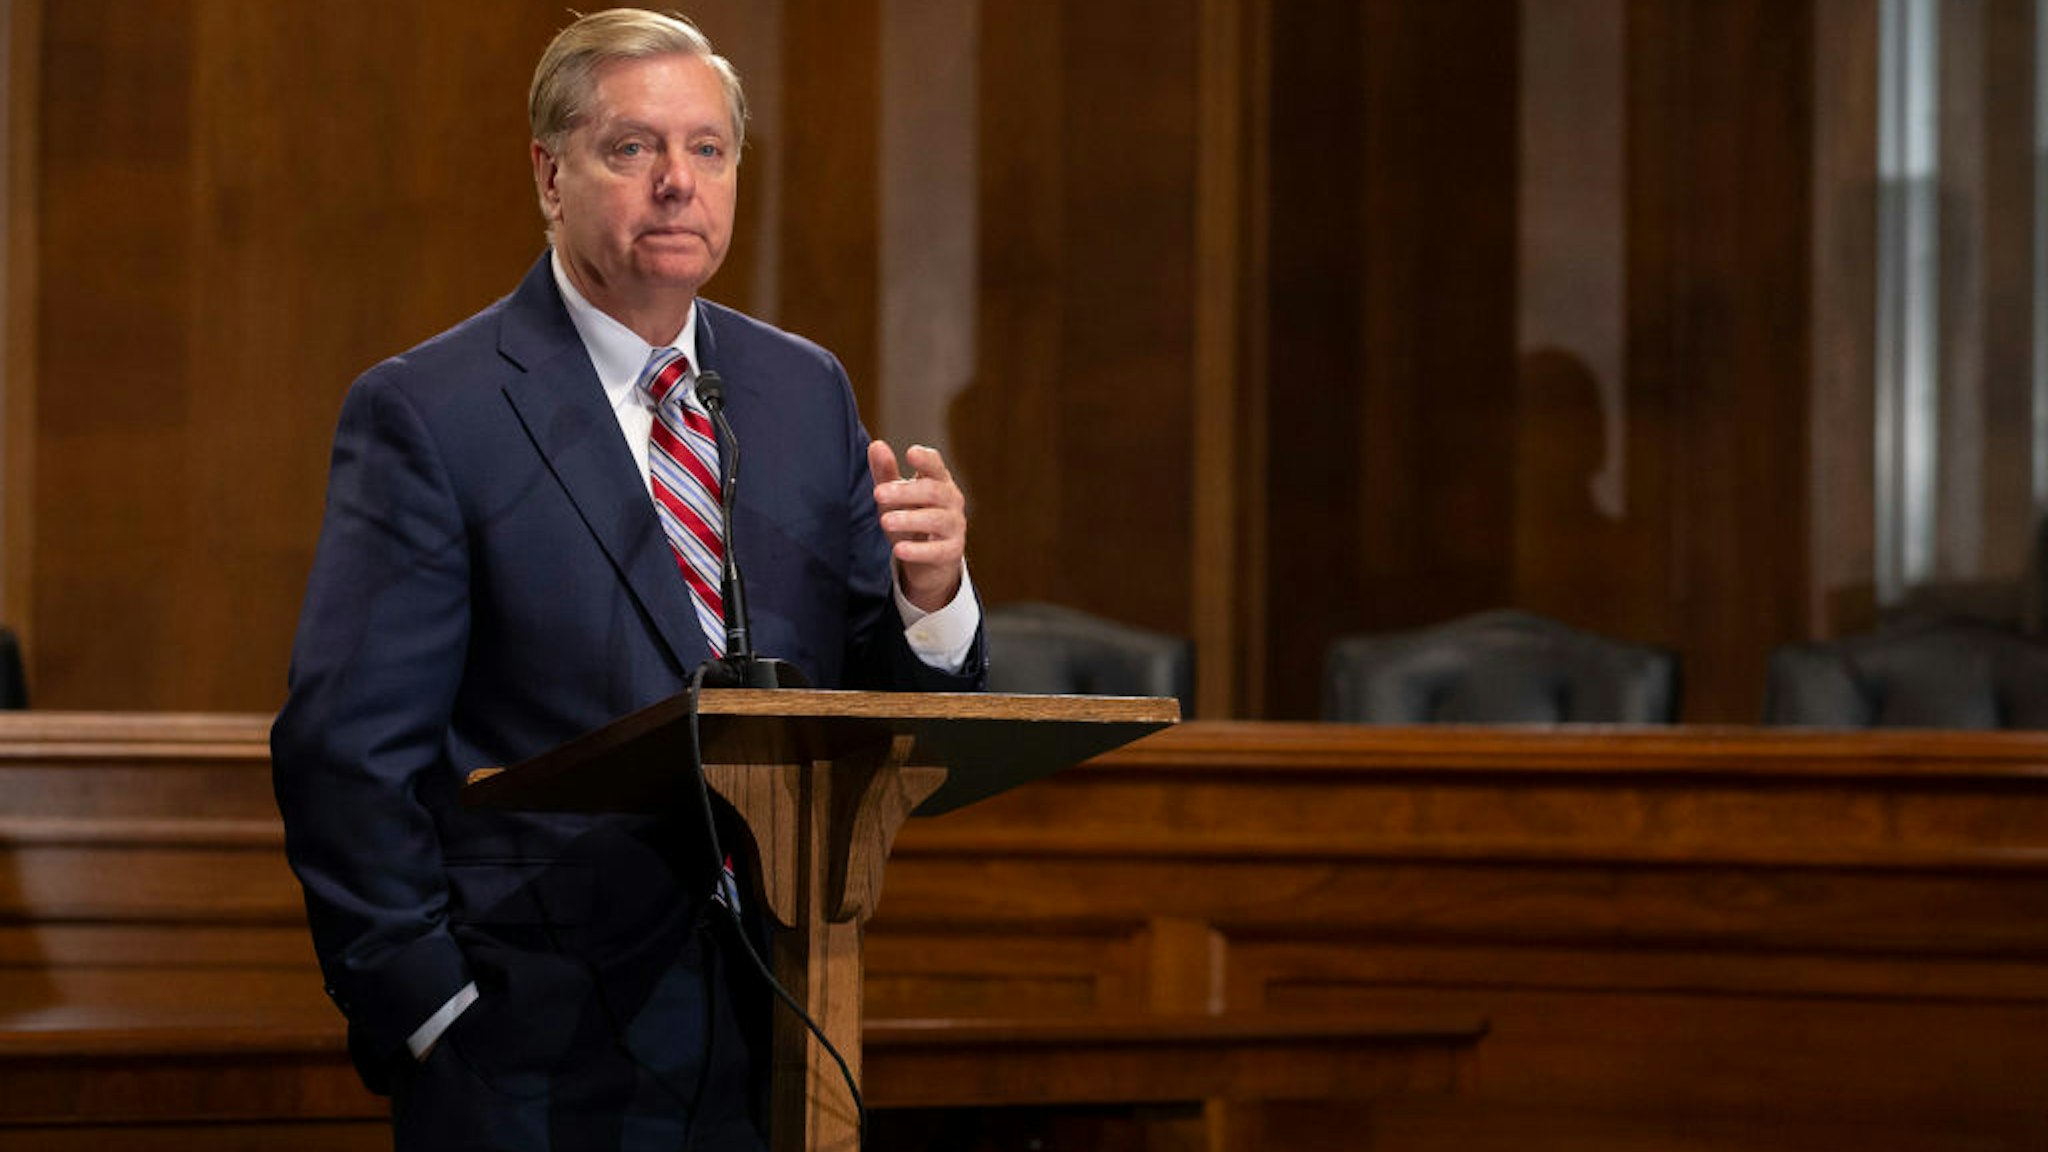 Lindsey Graham speaks at a news conference proposing legislation to address the crisis at the southern border